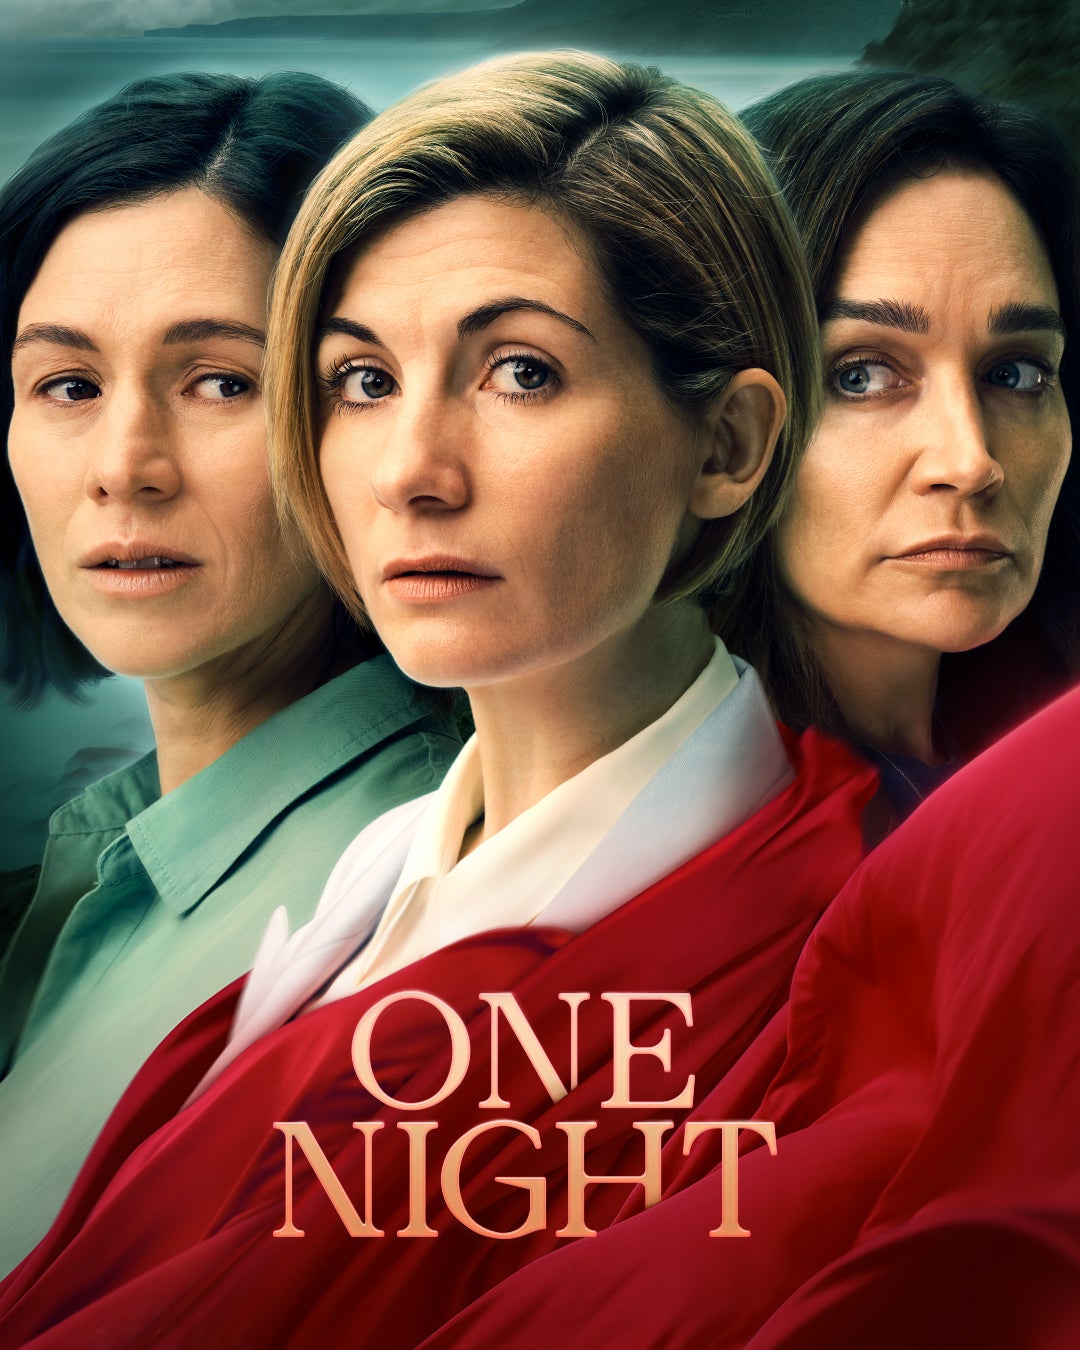 One Night, A Paramount+ Original Series Commences Filming. - Paramount ANZ